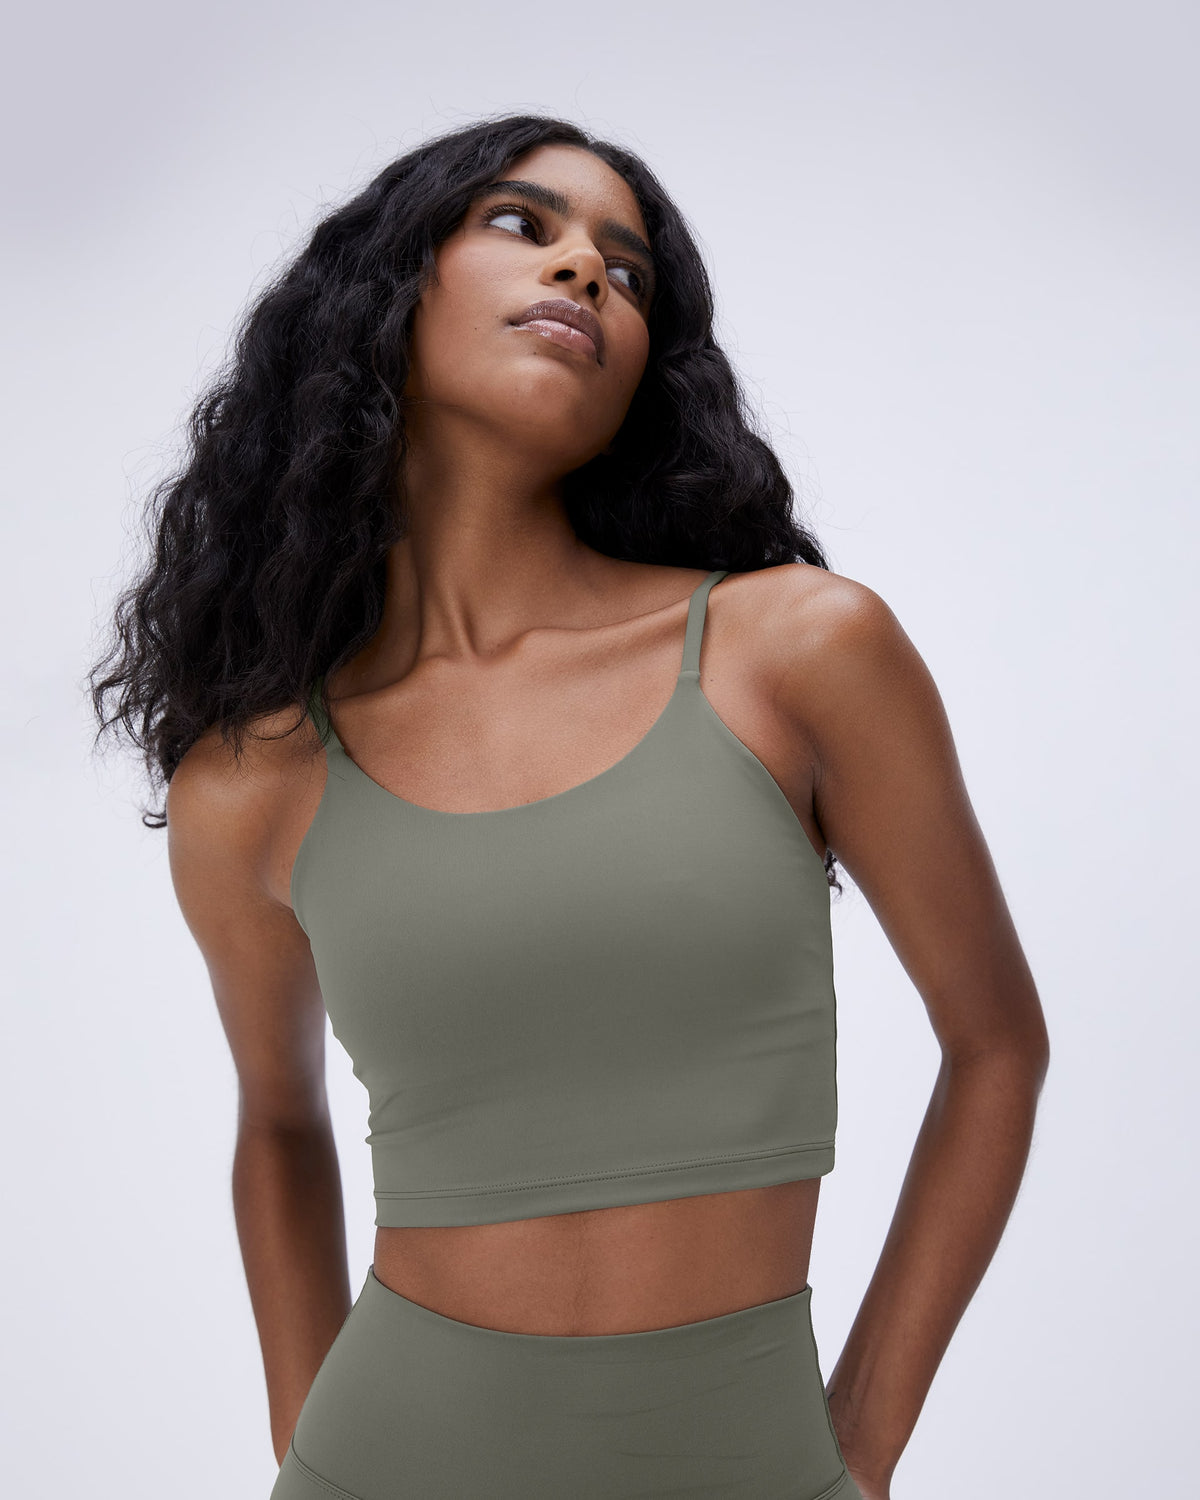 Olive Green Tank Bra Workout Top